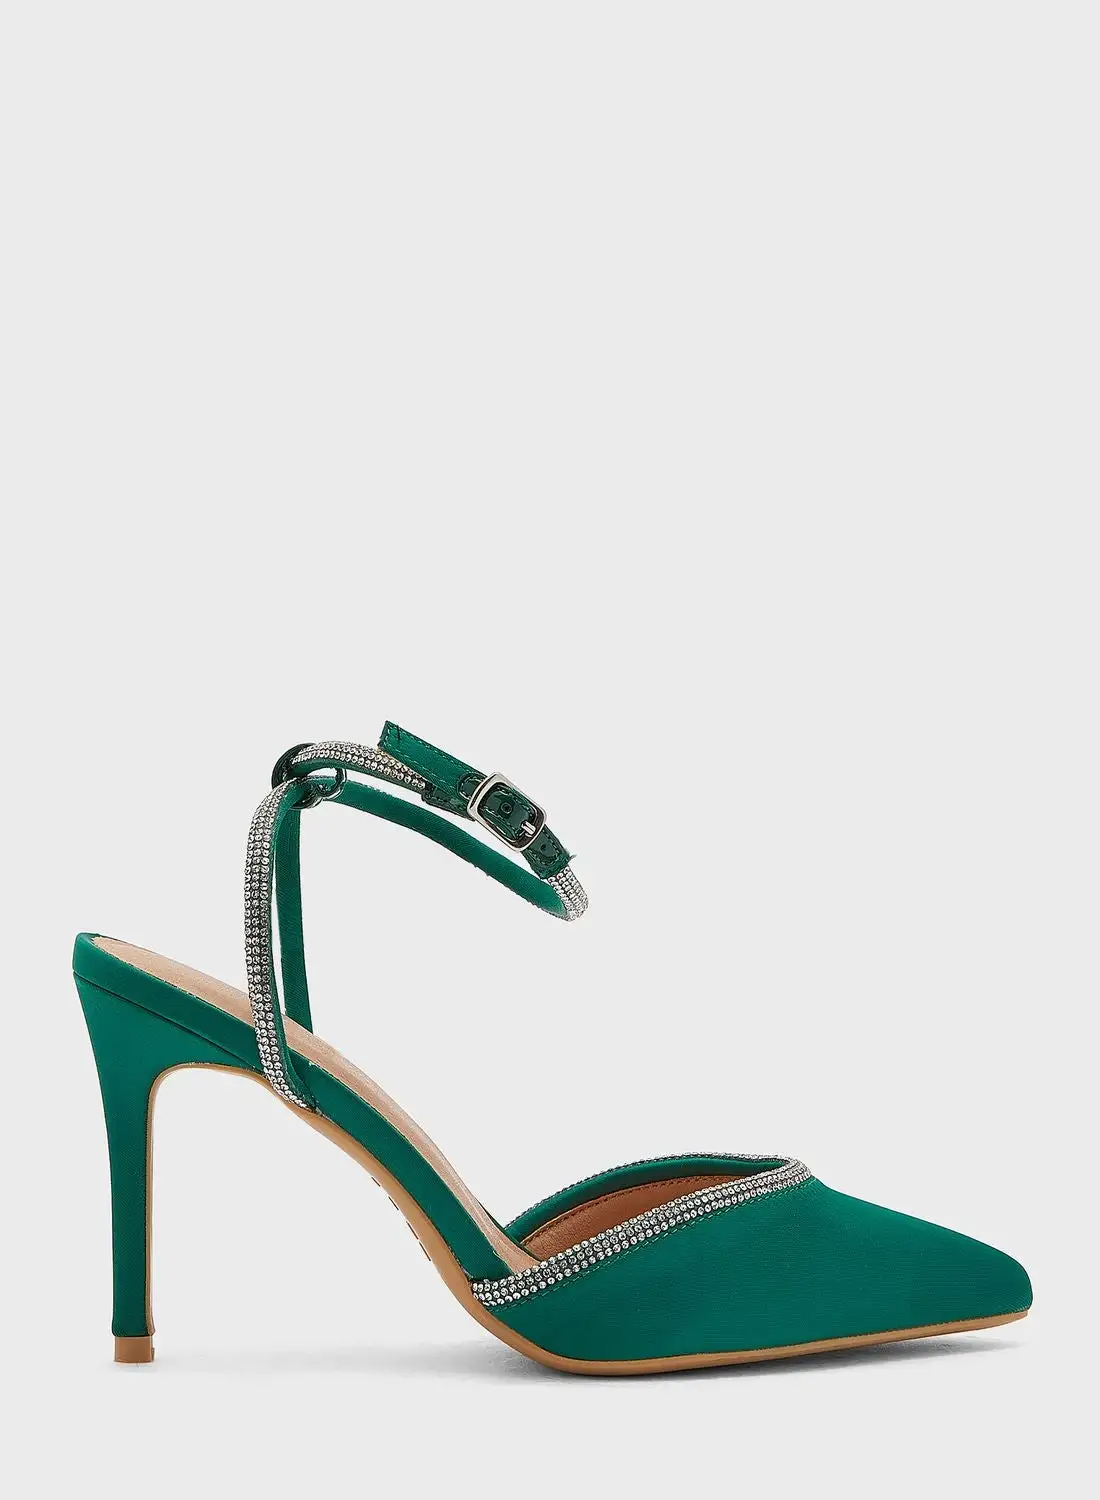 NEW LOOK Ankle Strap Pumps